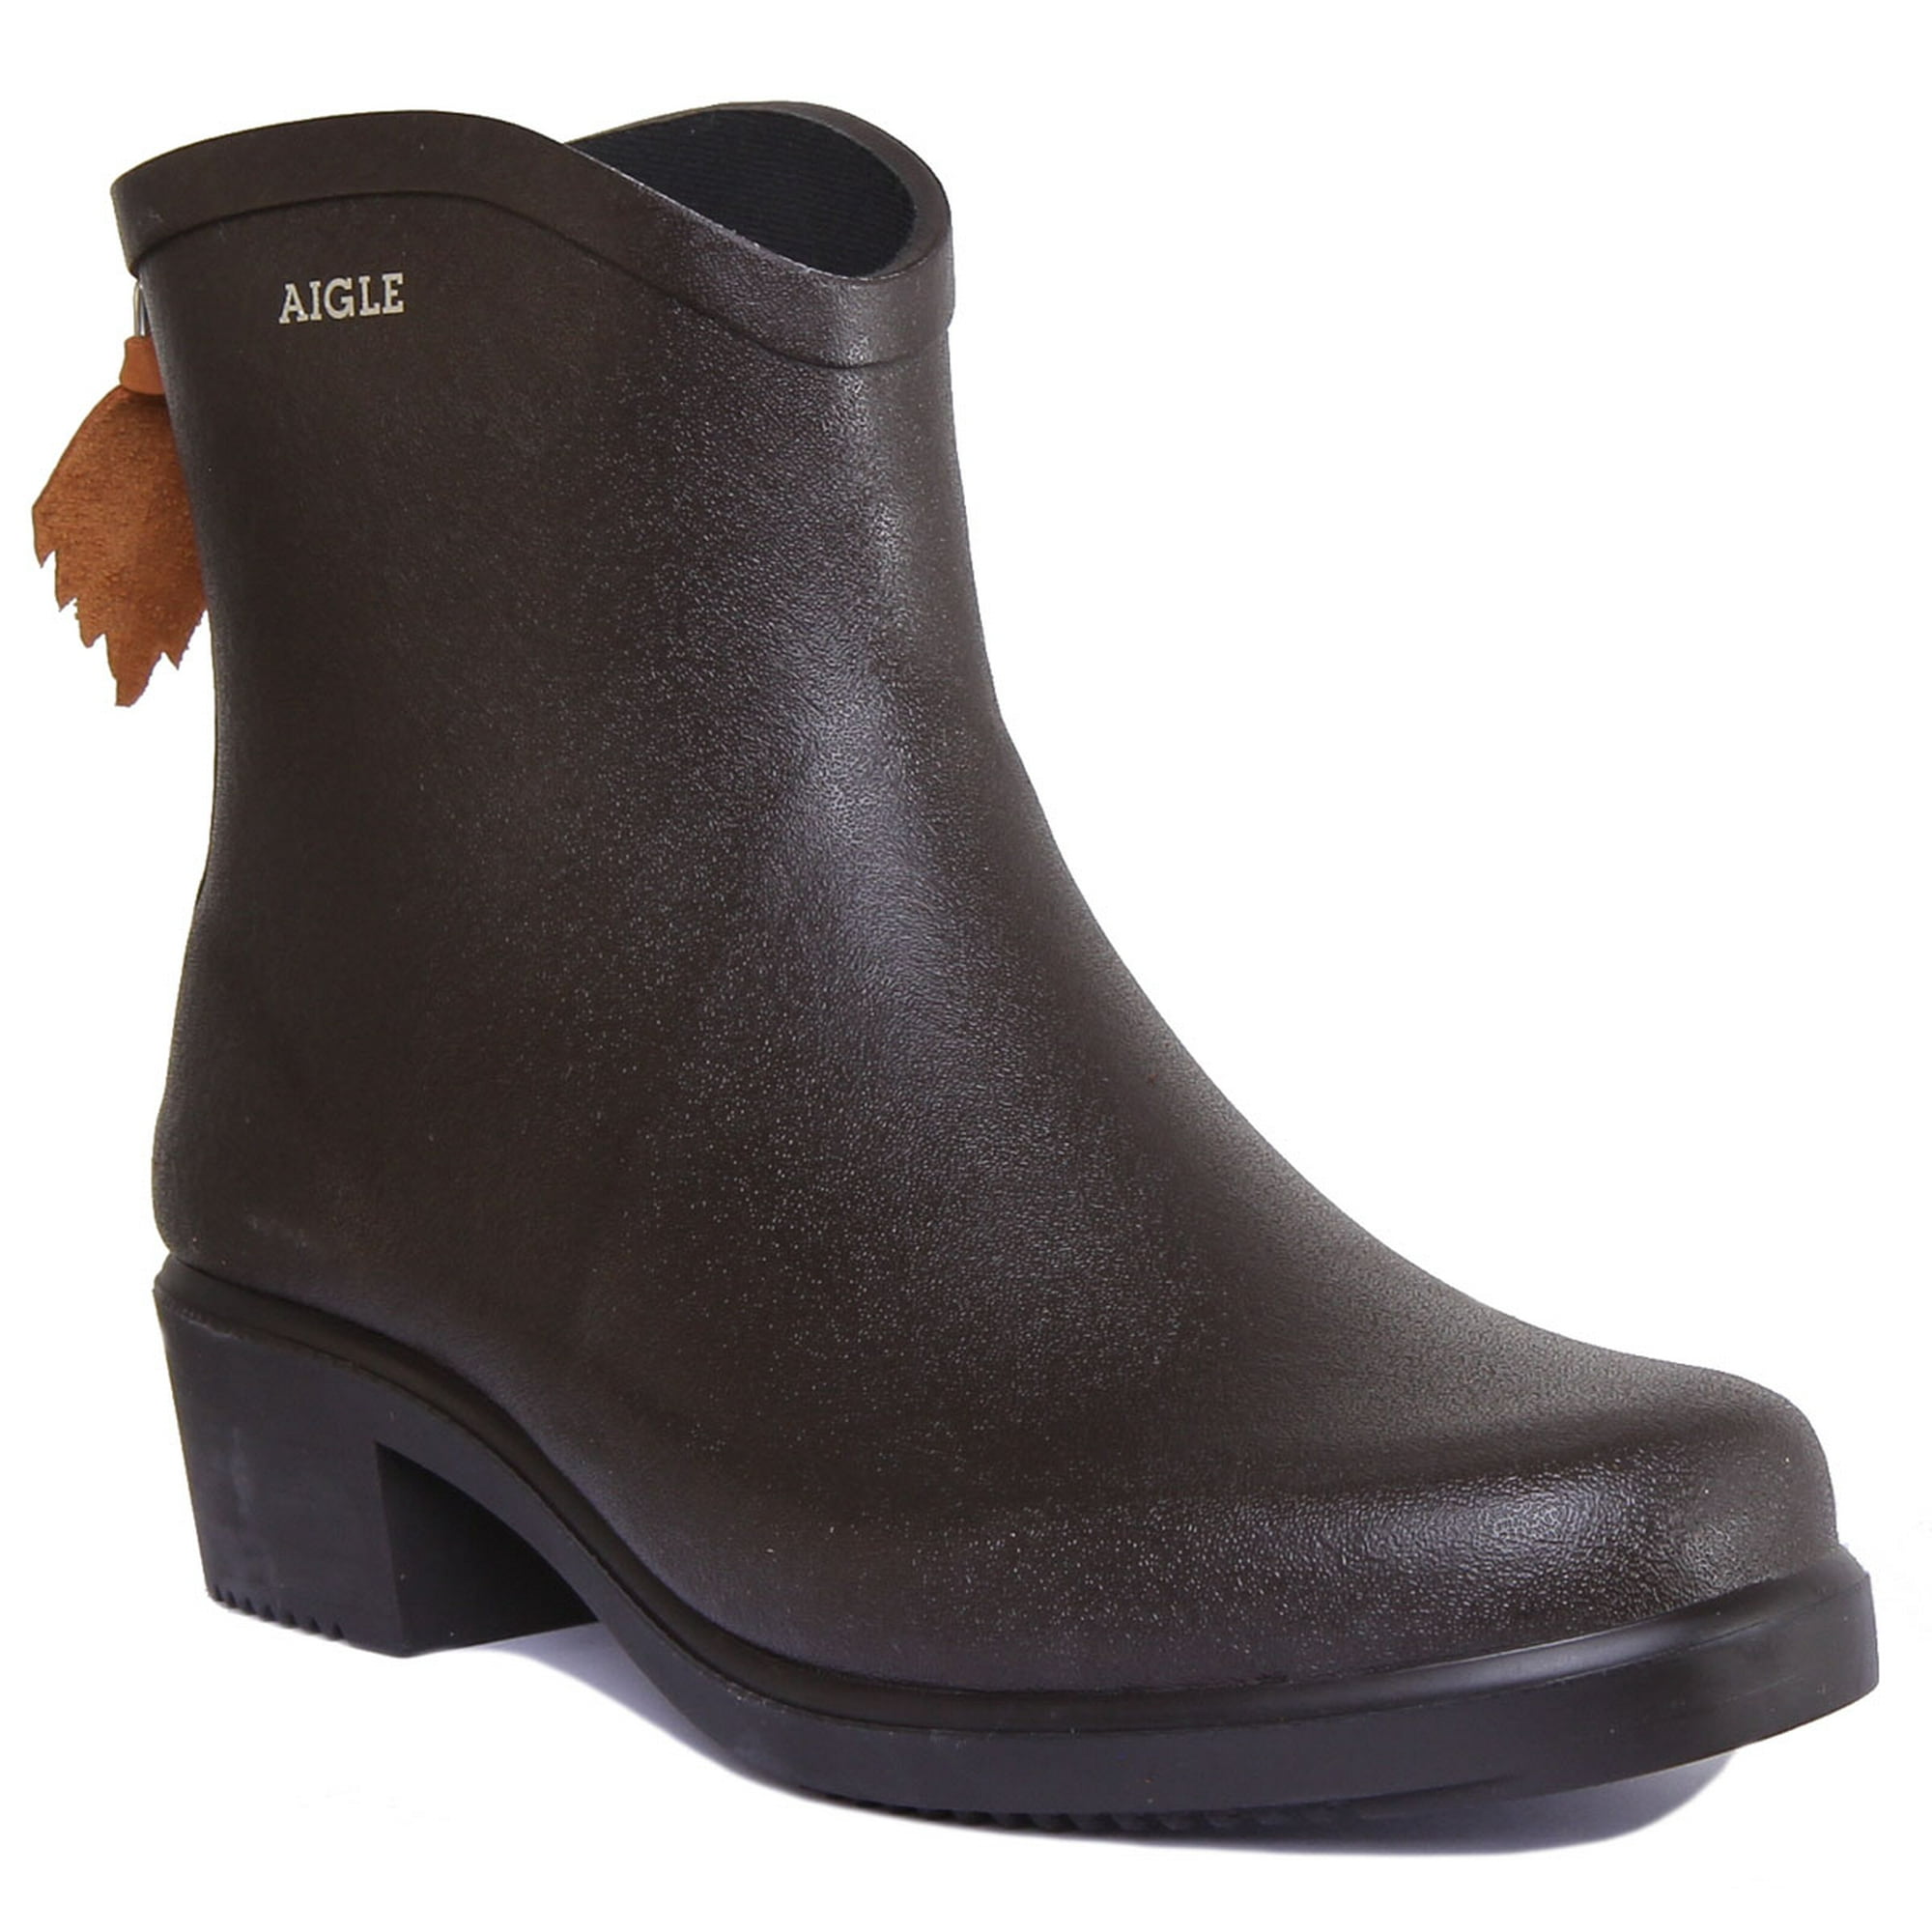 Aigle Miss Women's Rubber Ankle Boots In Brown Size 8 Walmart.com